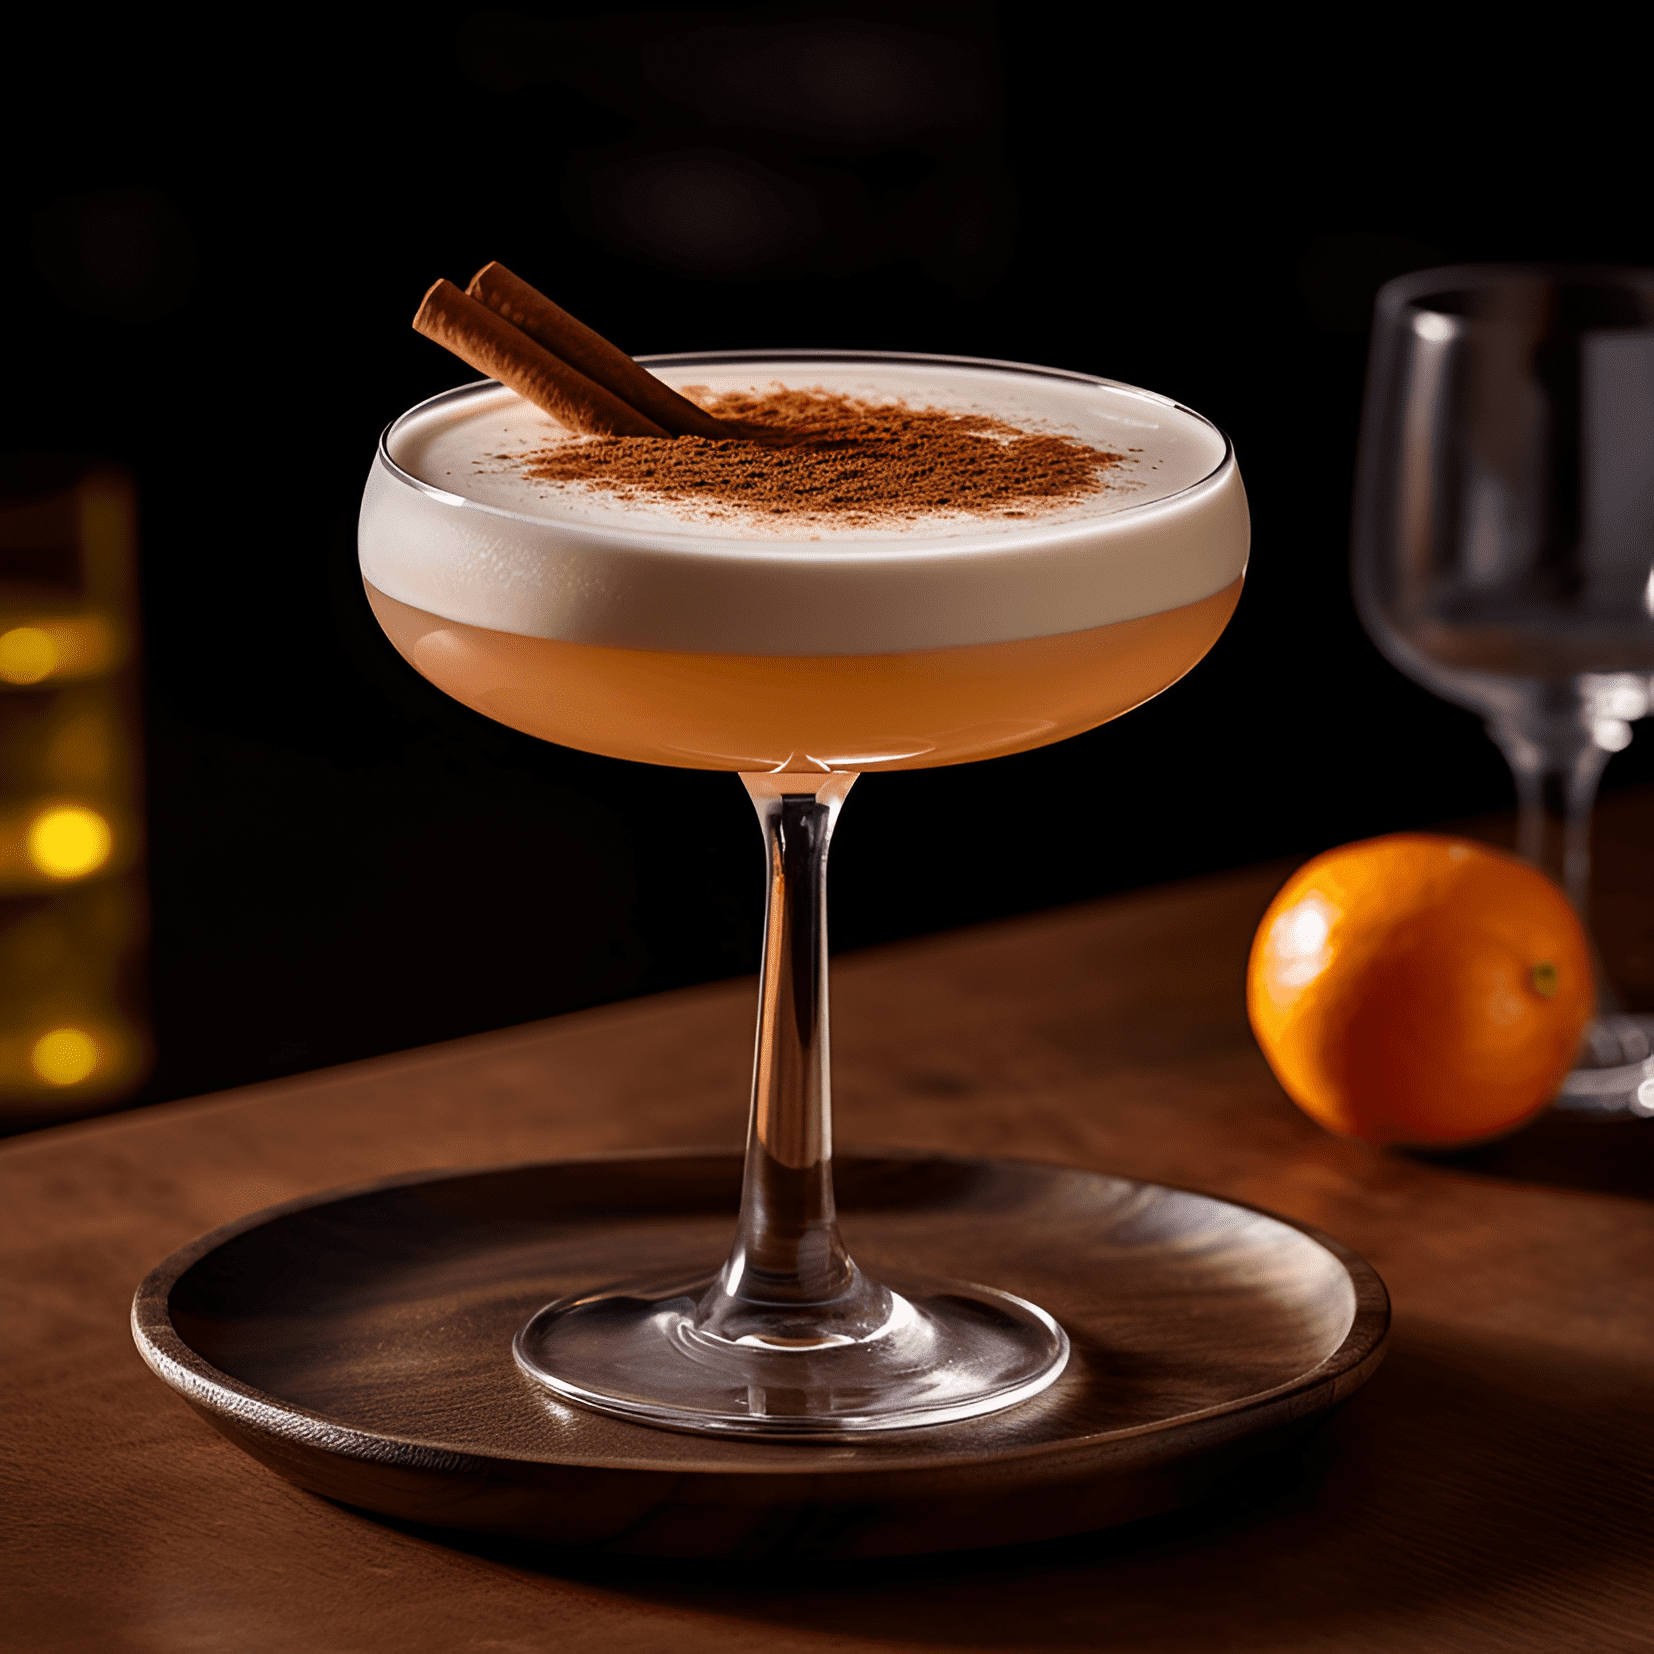 The Amber Moon cocktail offers a harmonious balance of flavors, with a rich and velvety texture. It has a subtle sweetness, followed by a warm and spicy kick. The combination of whiskey, honey, and cinnamon creates a smooth and comforting taste, perfect for sipping on a cool evening.